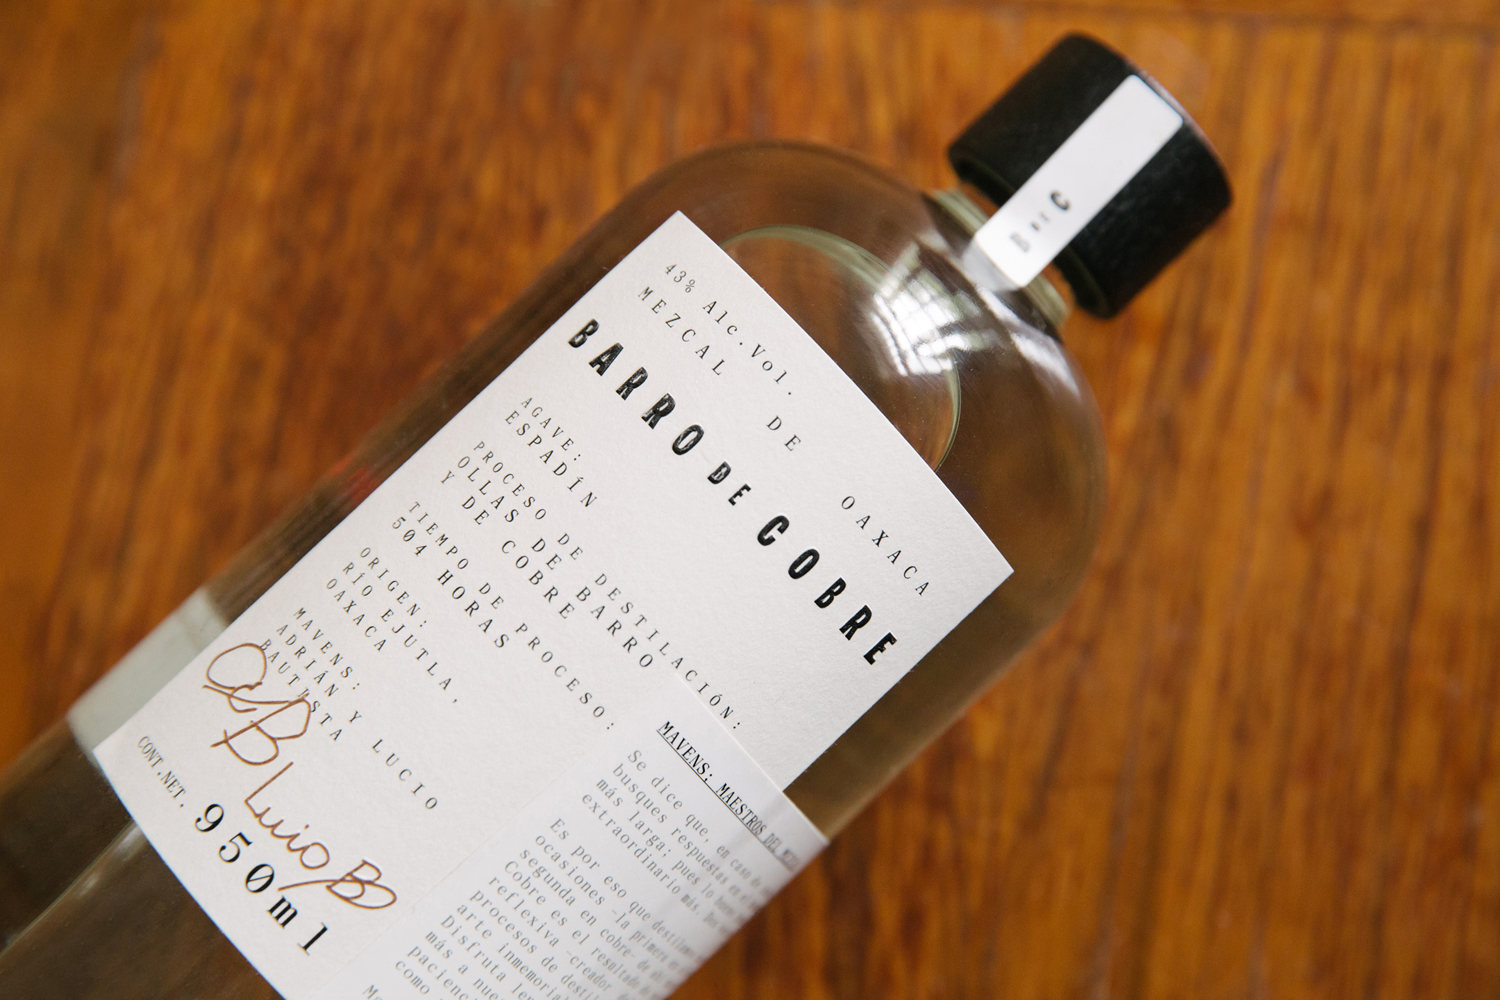 Branding and packaging by Mexican design studio Savvy for twice distilled mezcal Barro de Cobre